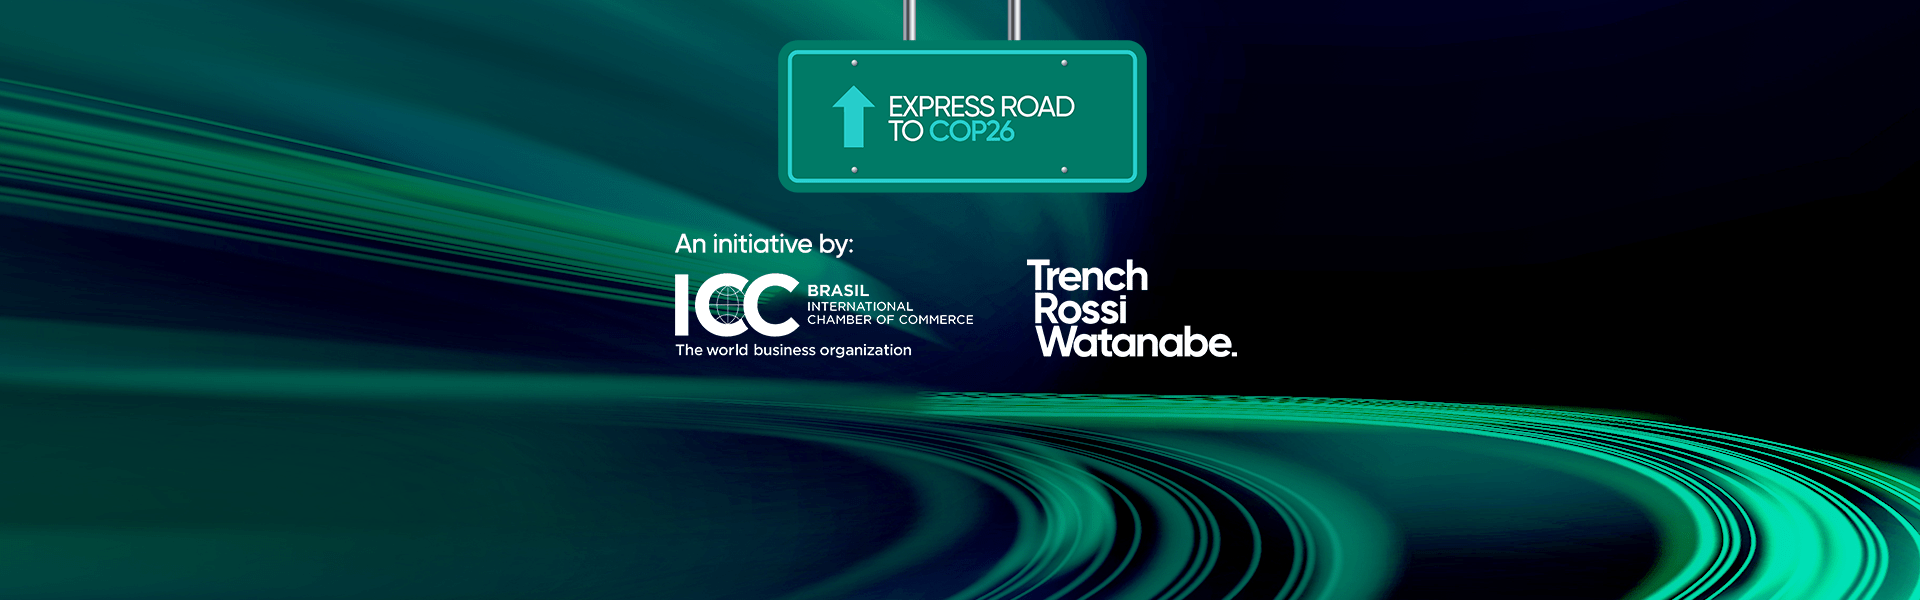 Express Road to Cop26